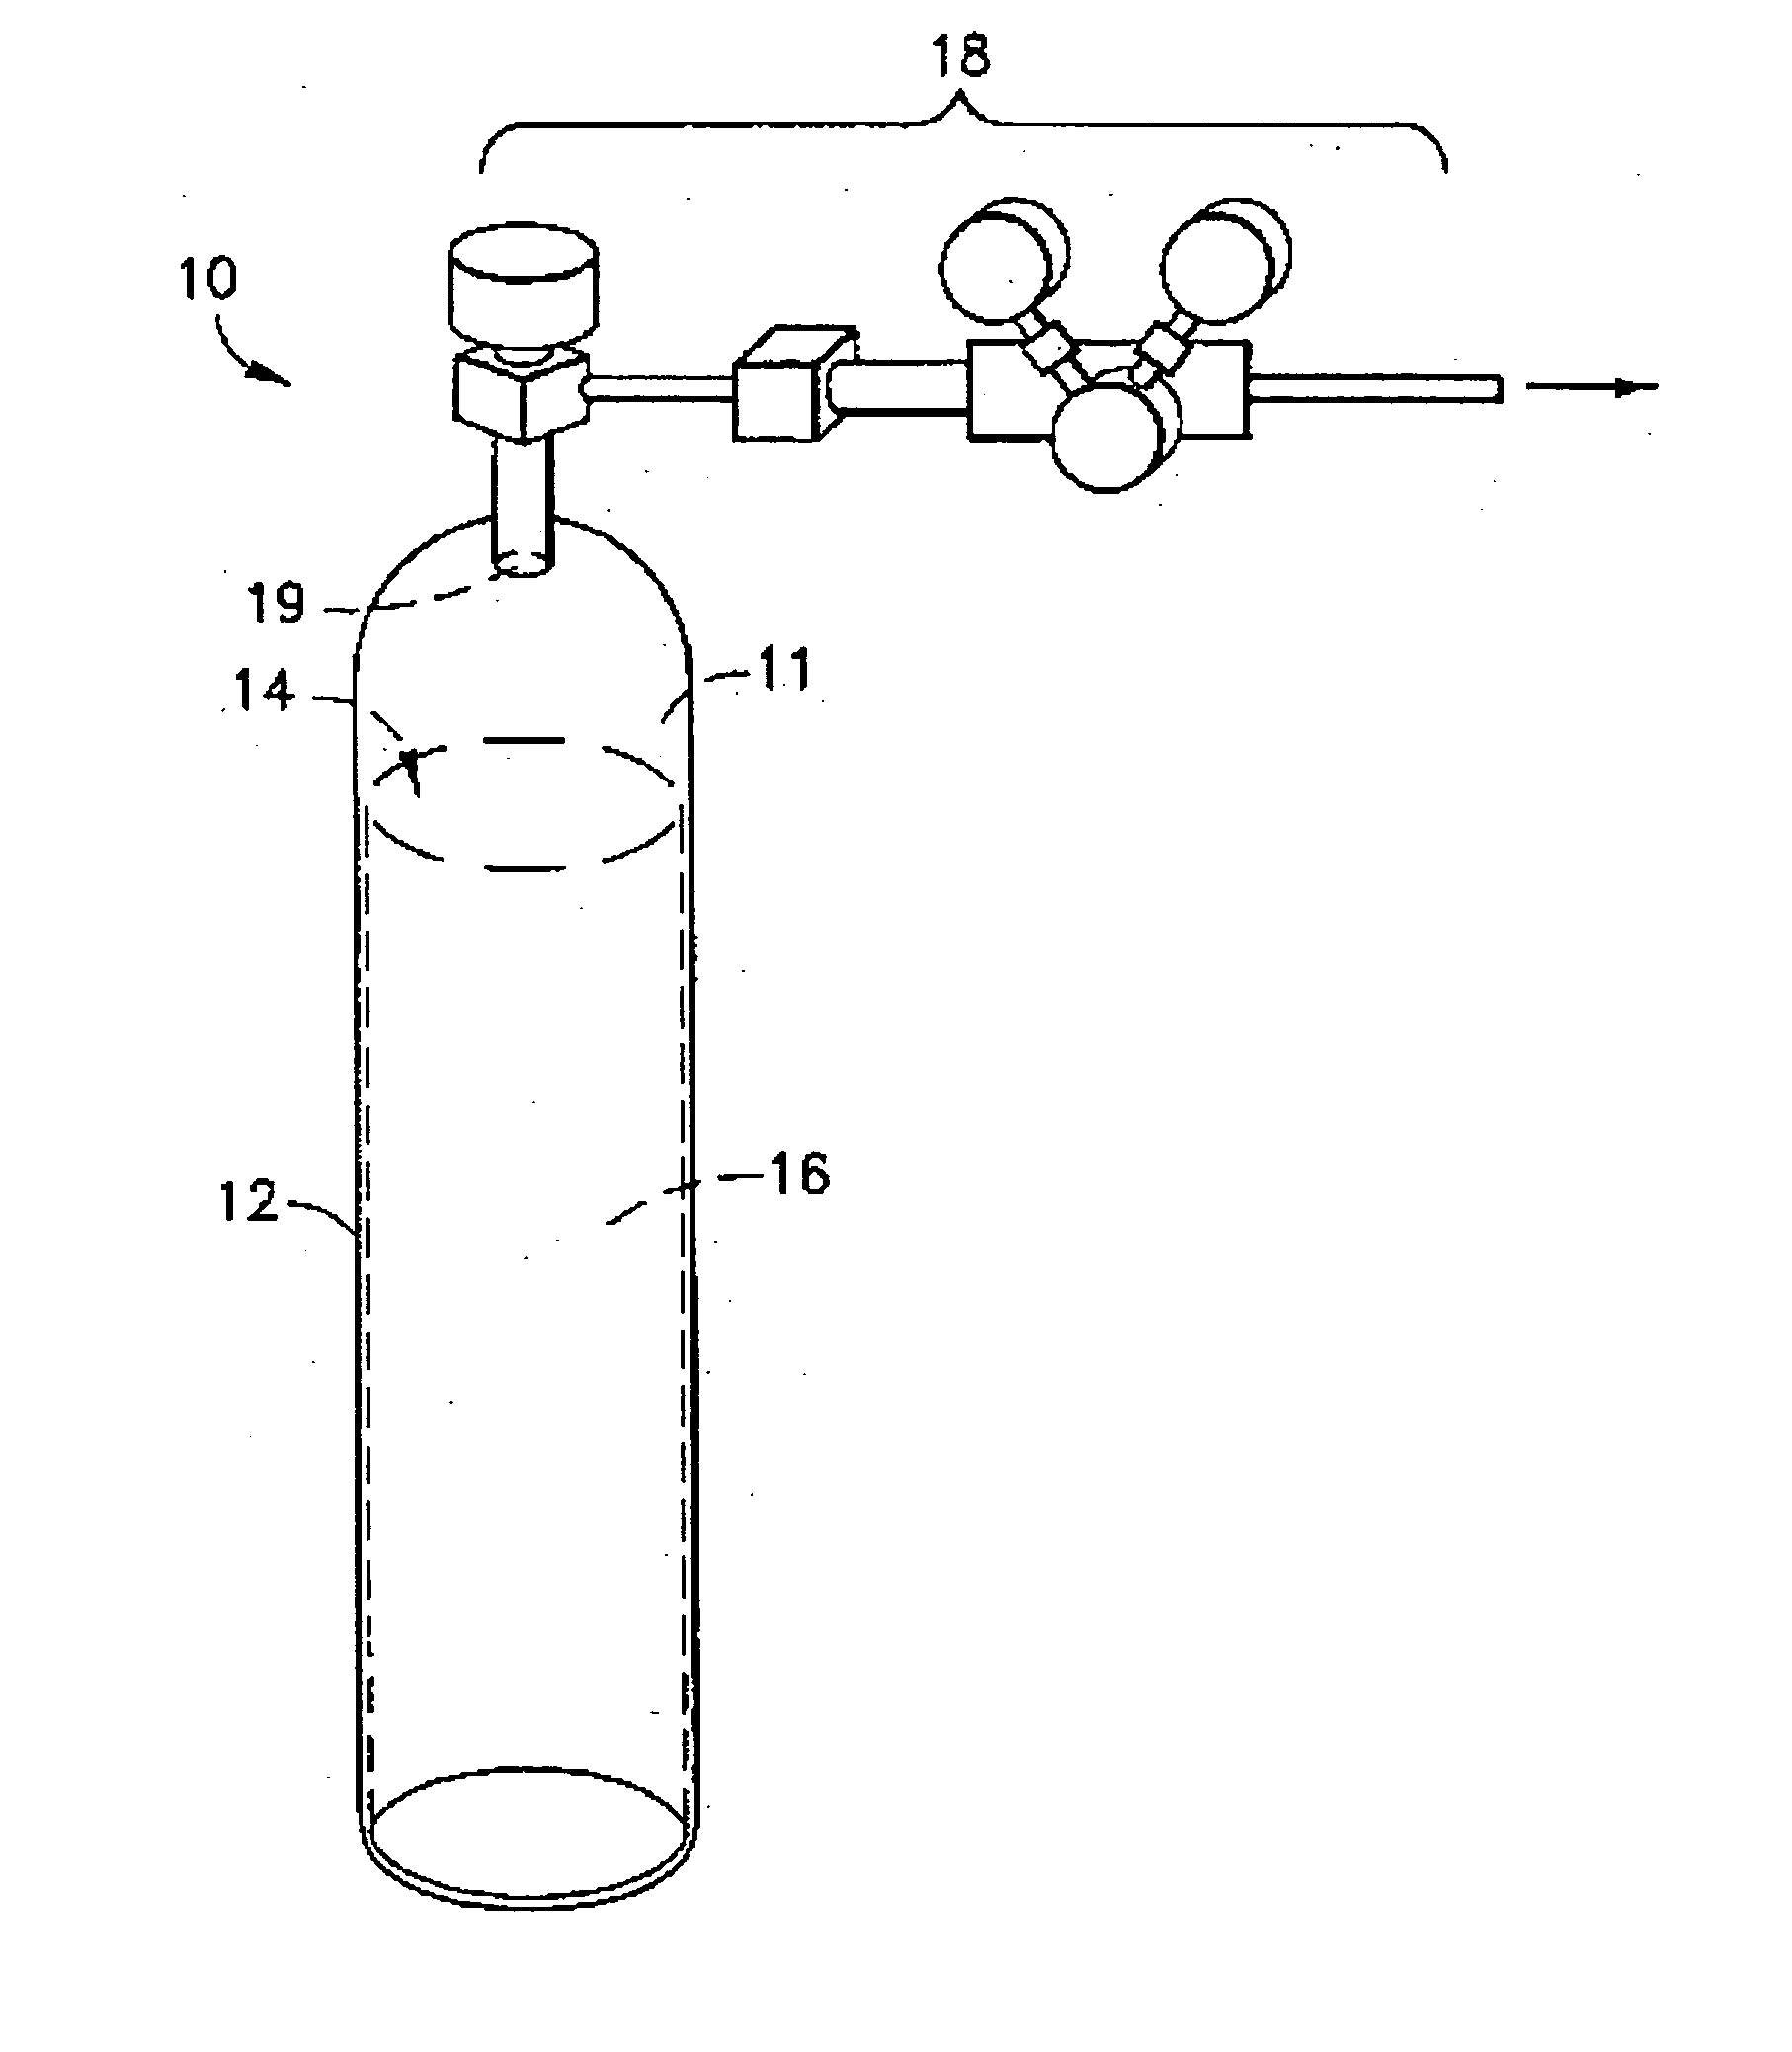 Liquid media containing Lewis acidic reactive compounds for storage and delivery of Lewis basic gases